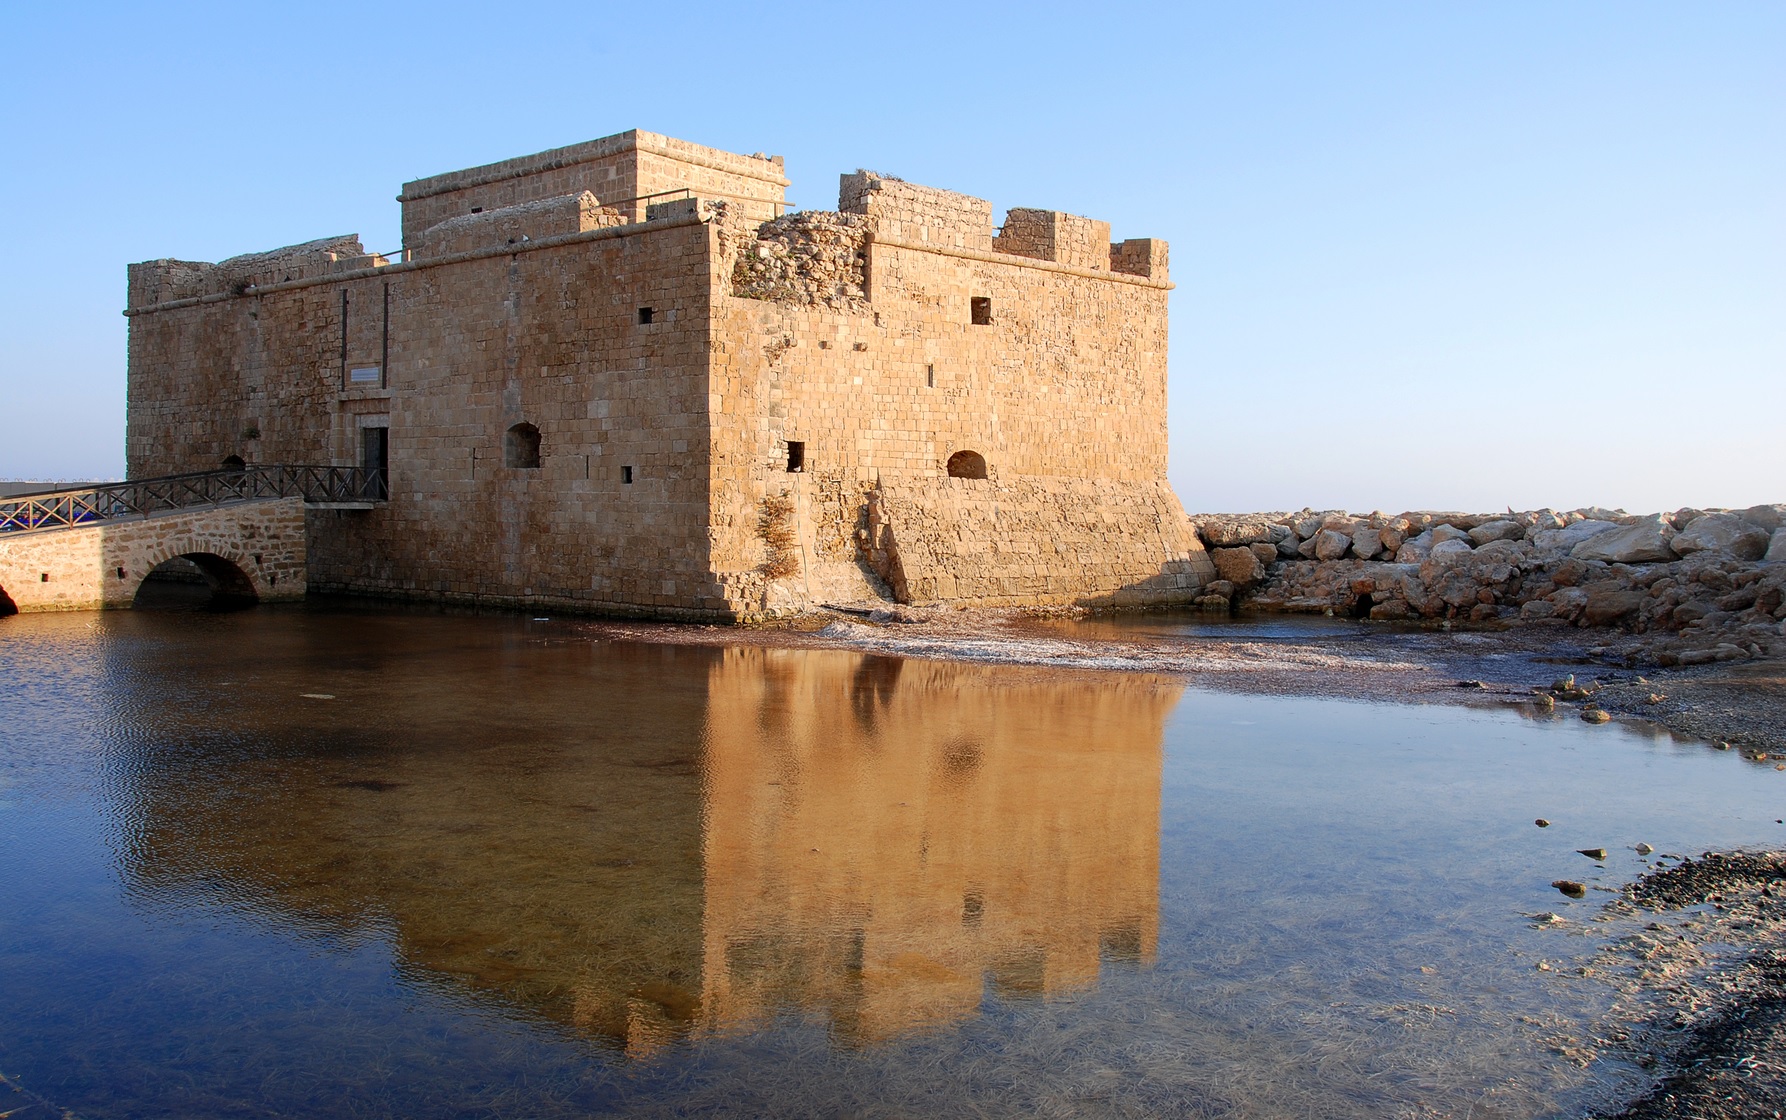 Its castle is one of the best reasons to visit Paphos